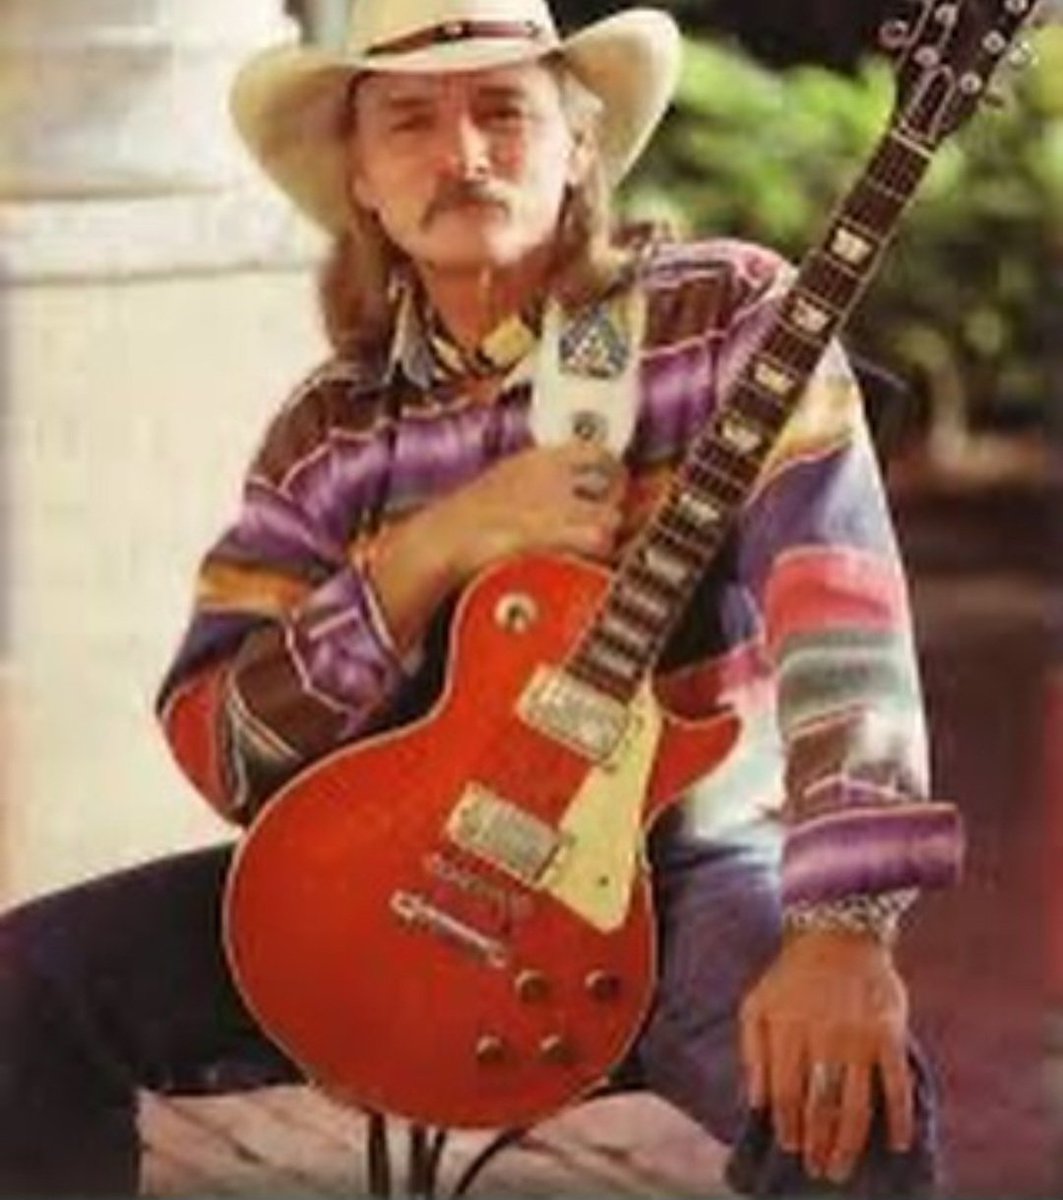 R.I.P. “Ramblin’ Man!!!! Another Legend gone too soon!!!! But I’m sure he’s having a drink and jam with Greg and Duane!!!! #allmanbrothers #allmanbrothersband